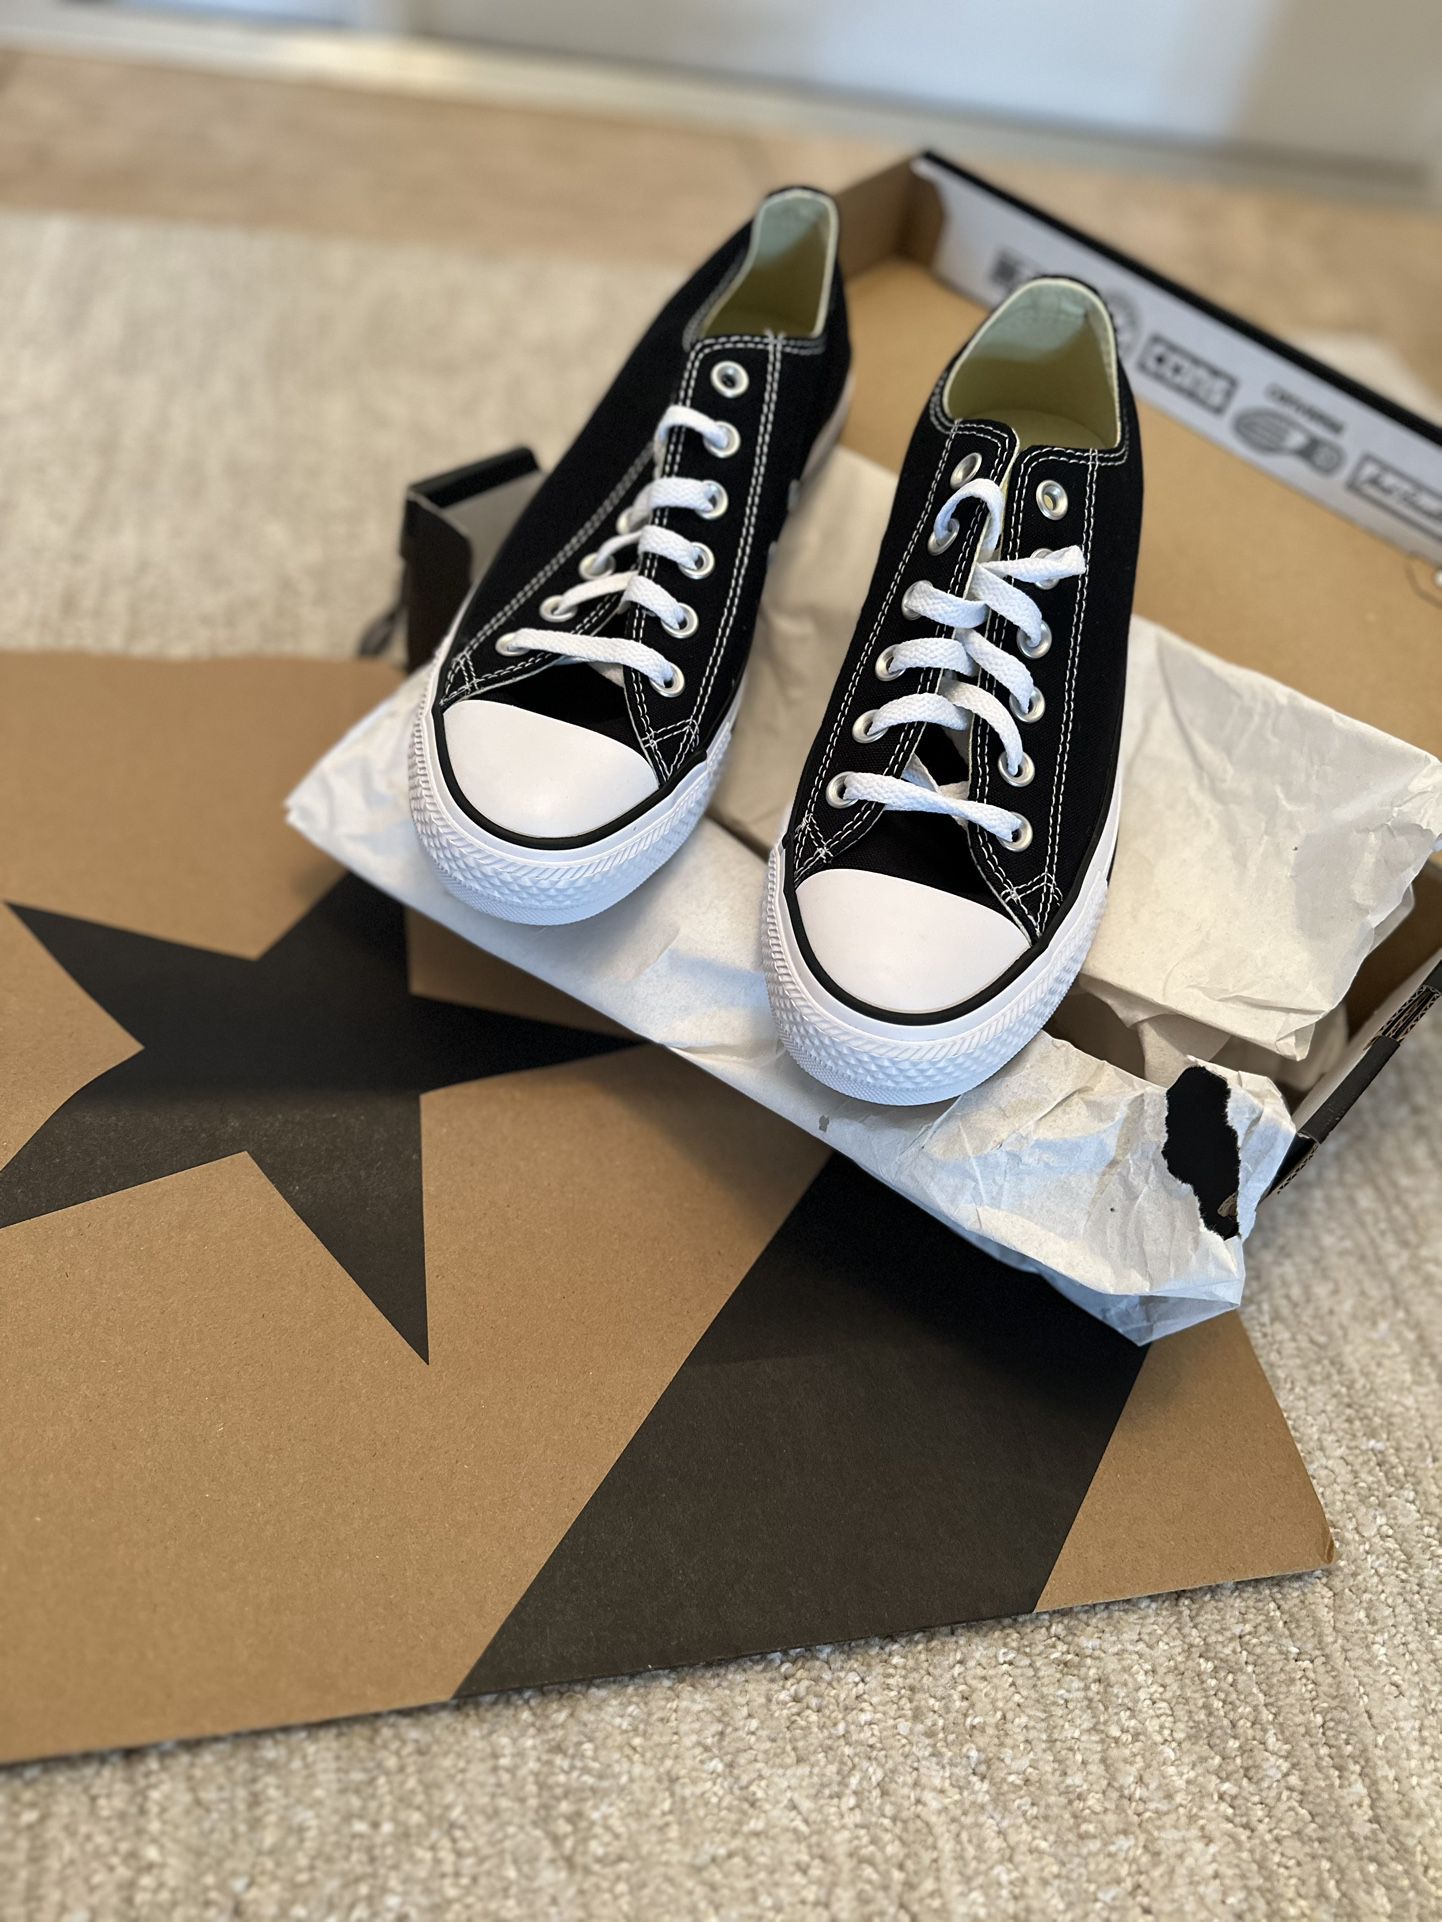 BRAND NEW IN BOX CONVERSE BLACK LOW TOPS~ SIZE M 6.5 W 8.5